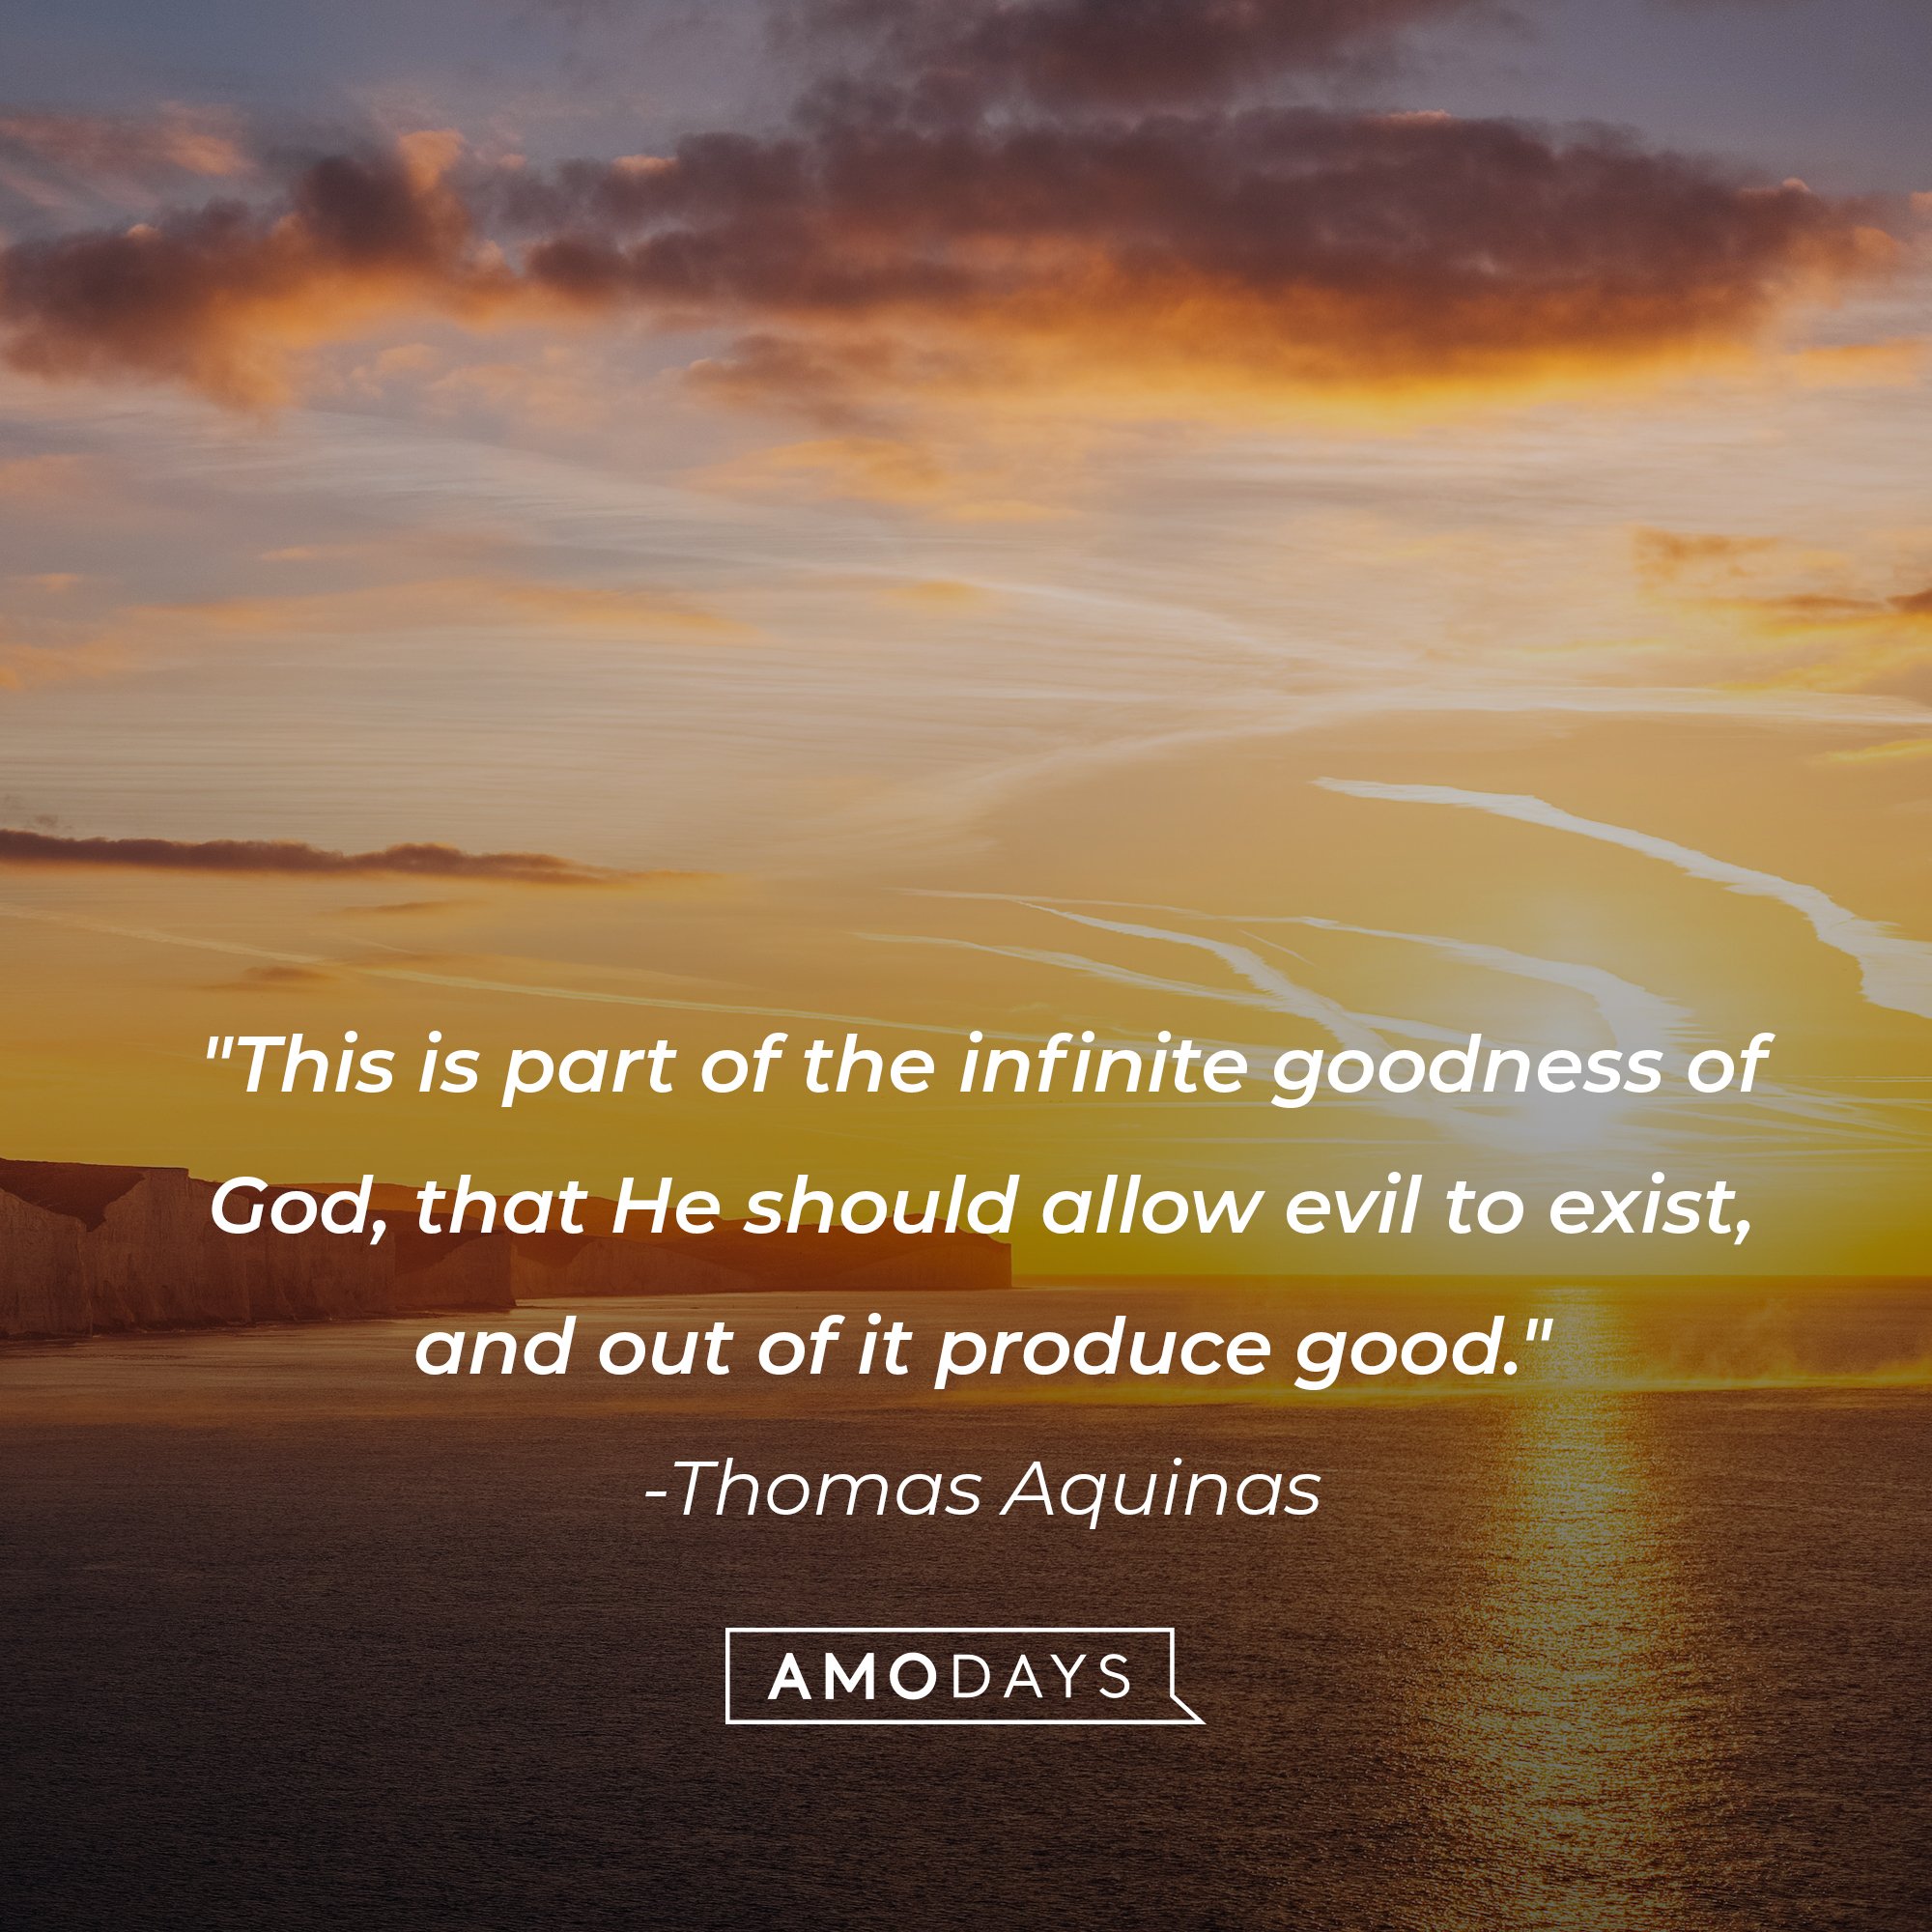 Thomas Aquinas’ quote: "This is part of the infinite goodness of God, that He should allow evil to exist, and out of it produce good." | Image: AmoDays   